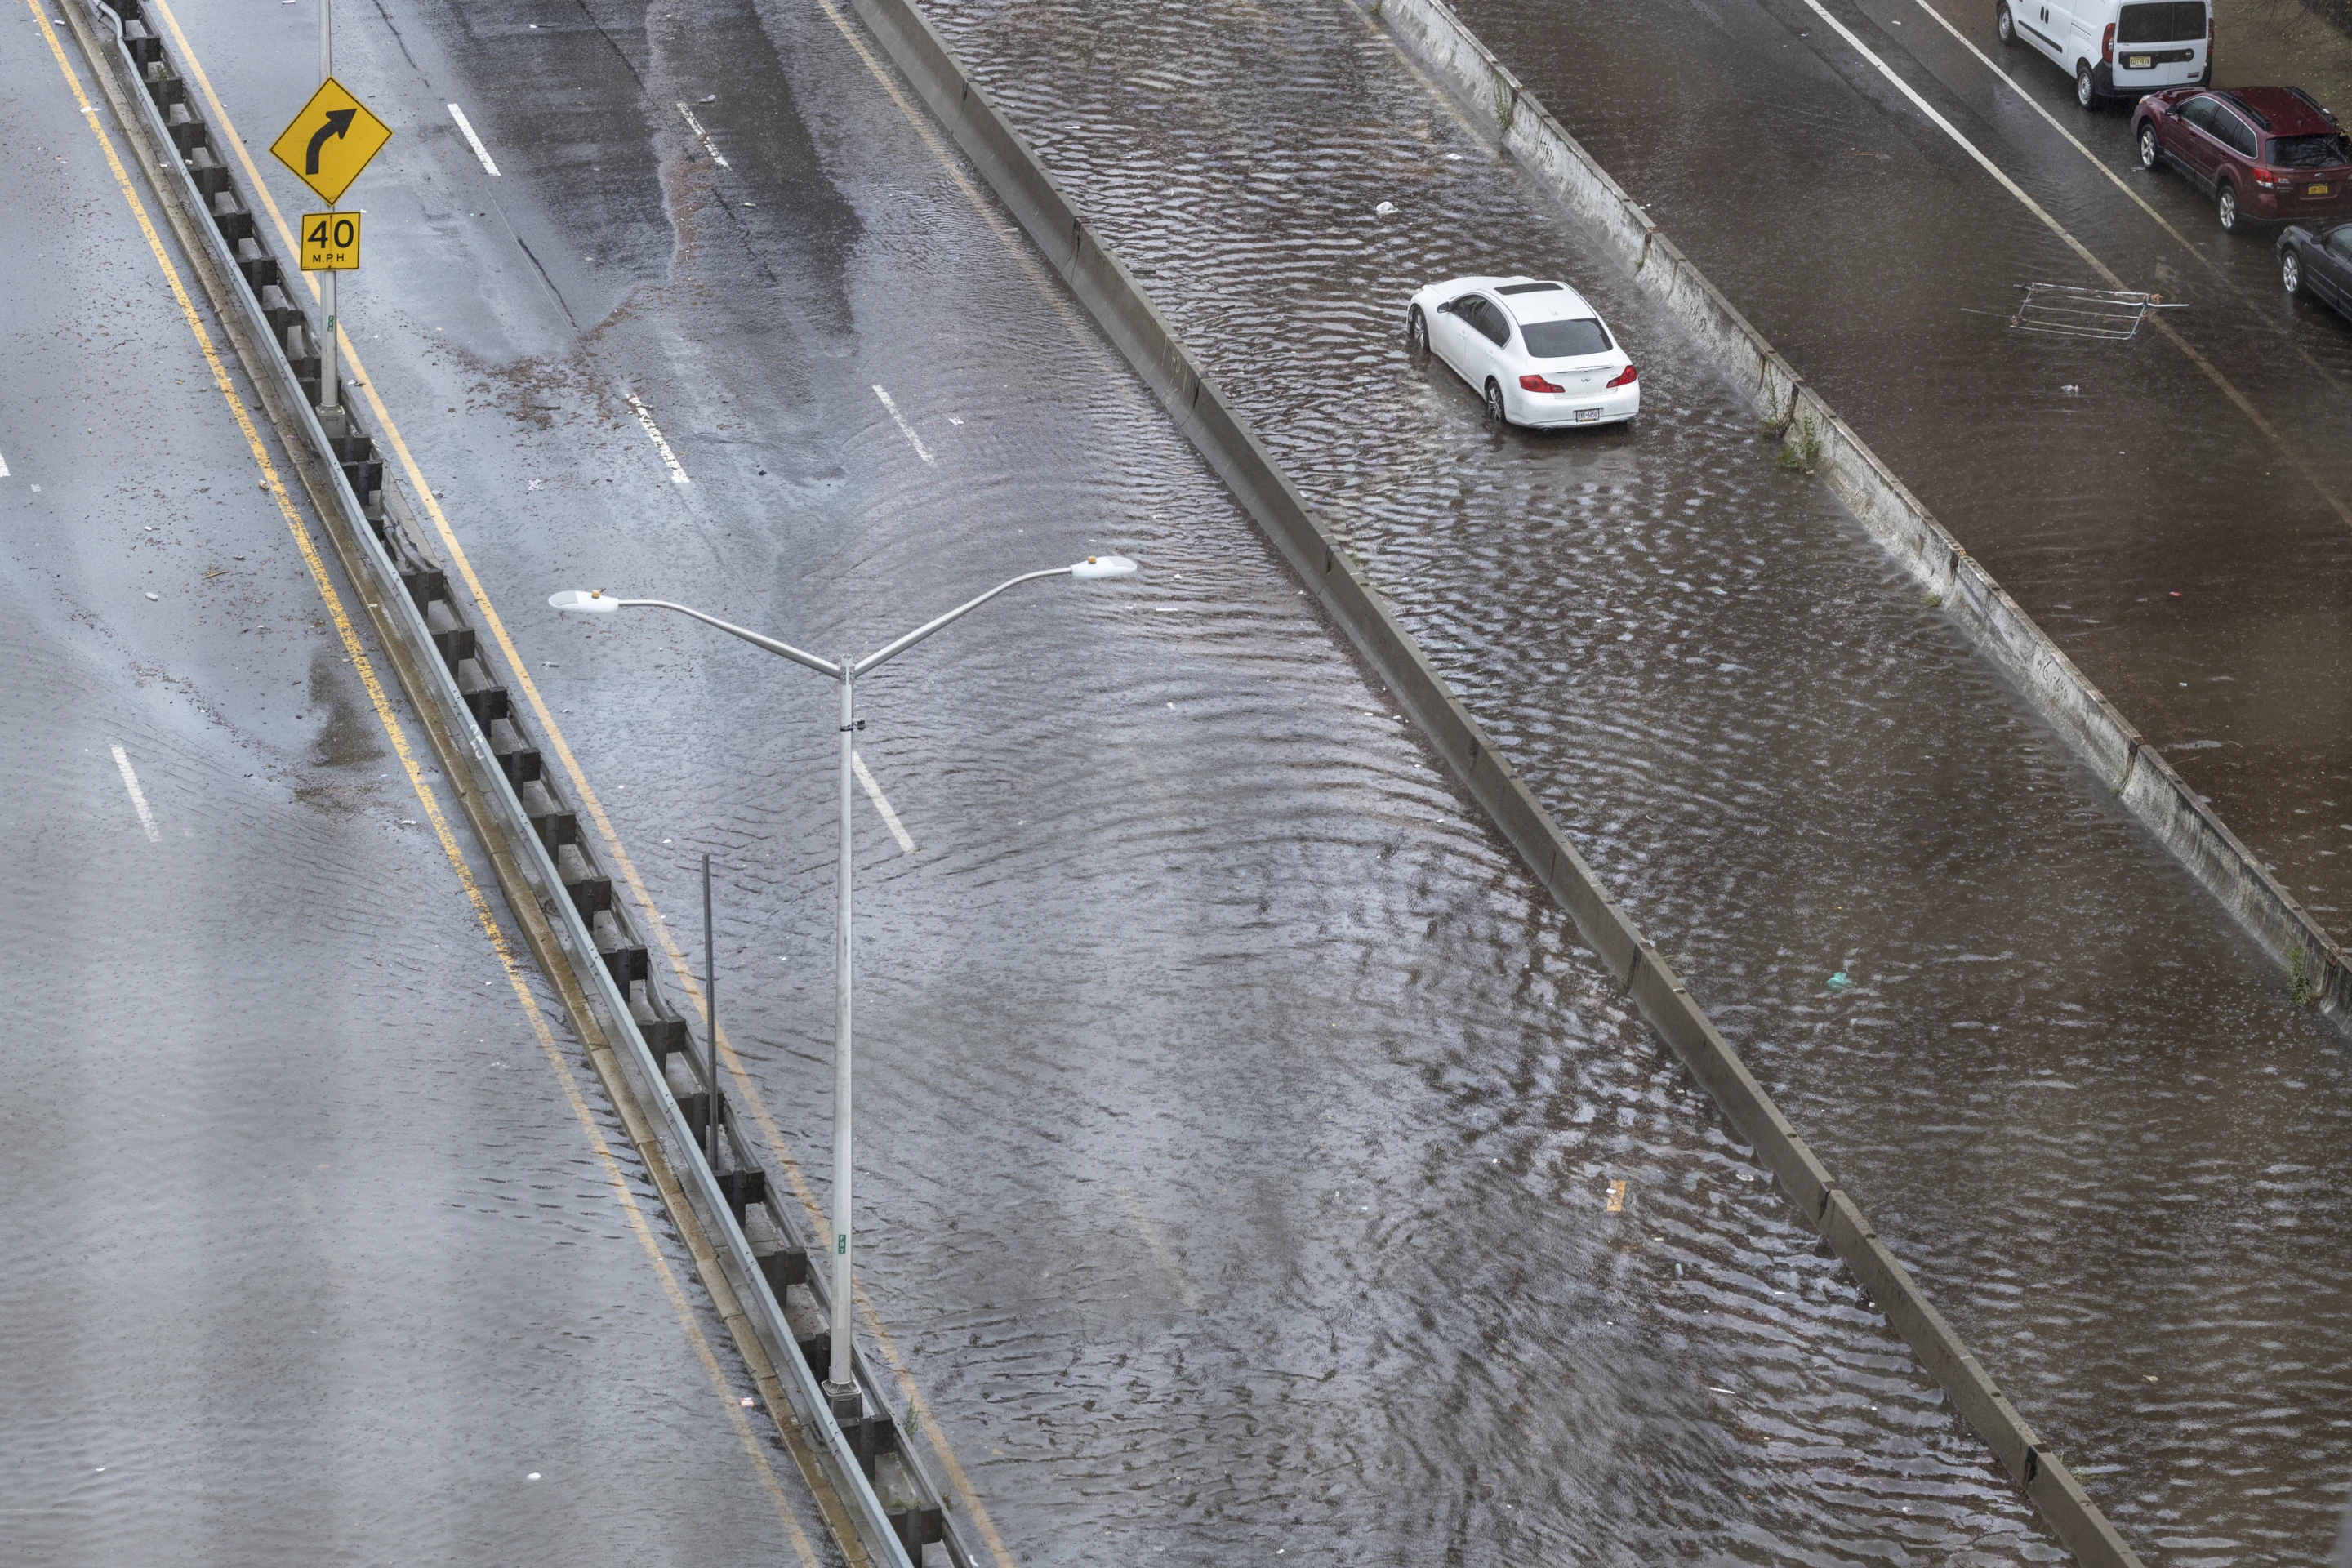 An abandoned car sits in flood waters on the FDR highway in the Lower East Side of Manhattan on Friday, 29 September 2023 in New York. A potent rush-hour rainstorm swamped the New York metropolitan area on Friday, shutting down some subways and commuter railroads, flooding streets and highways, and delaying flights into LaGuardia Airport. Photo: Stefan Jeremiah / AP Photo